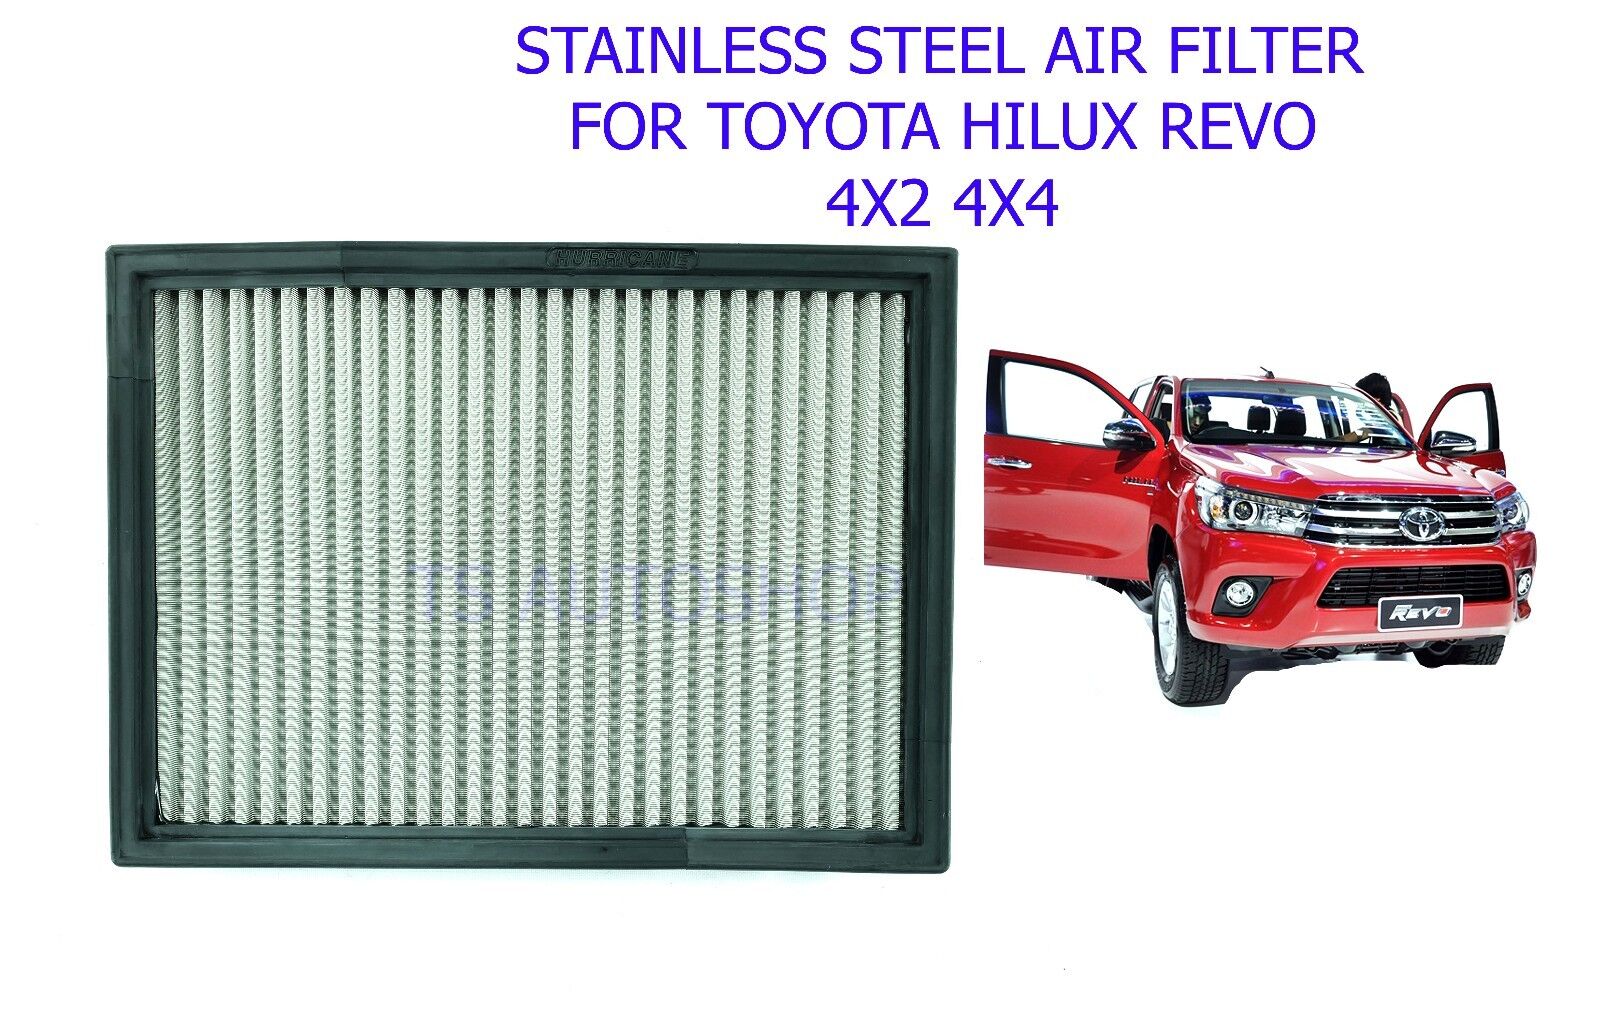 HURRICANE STAINLESS AIR FILTER For TOYOTA HILUX REVO SR5 M70 M80 2015 2018